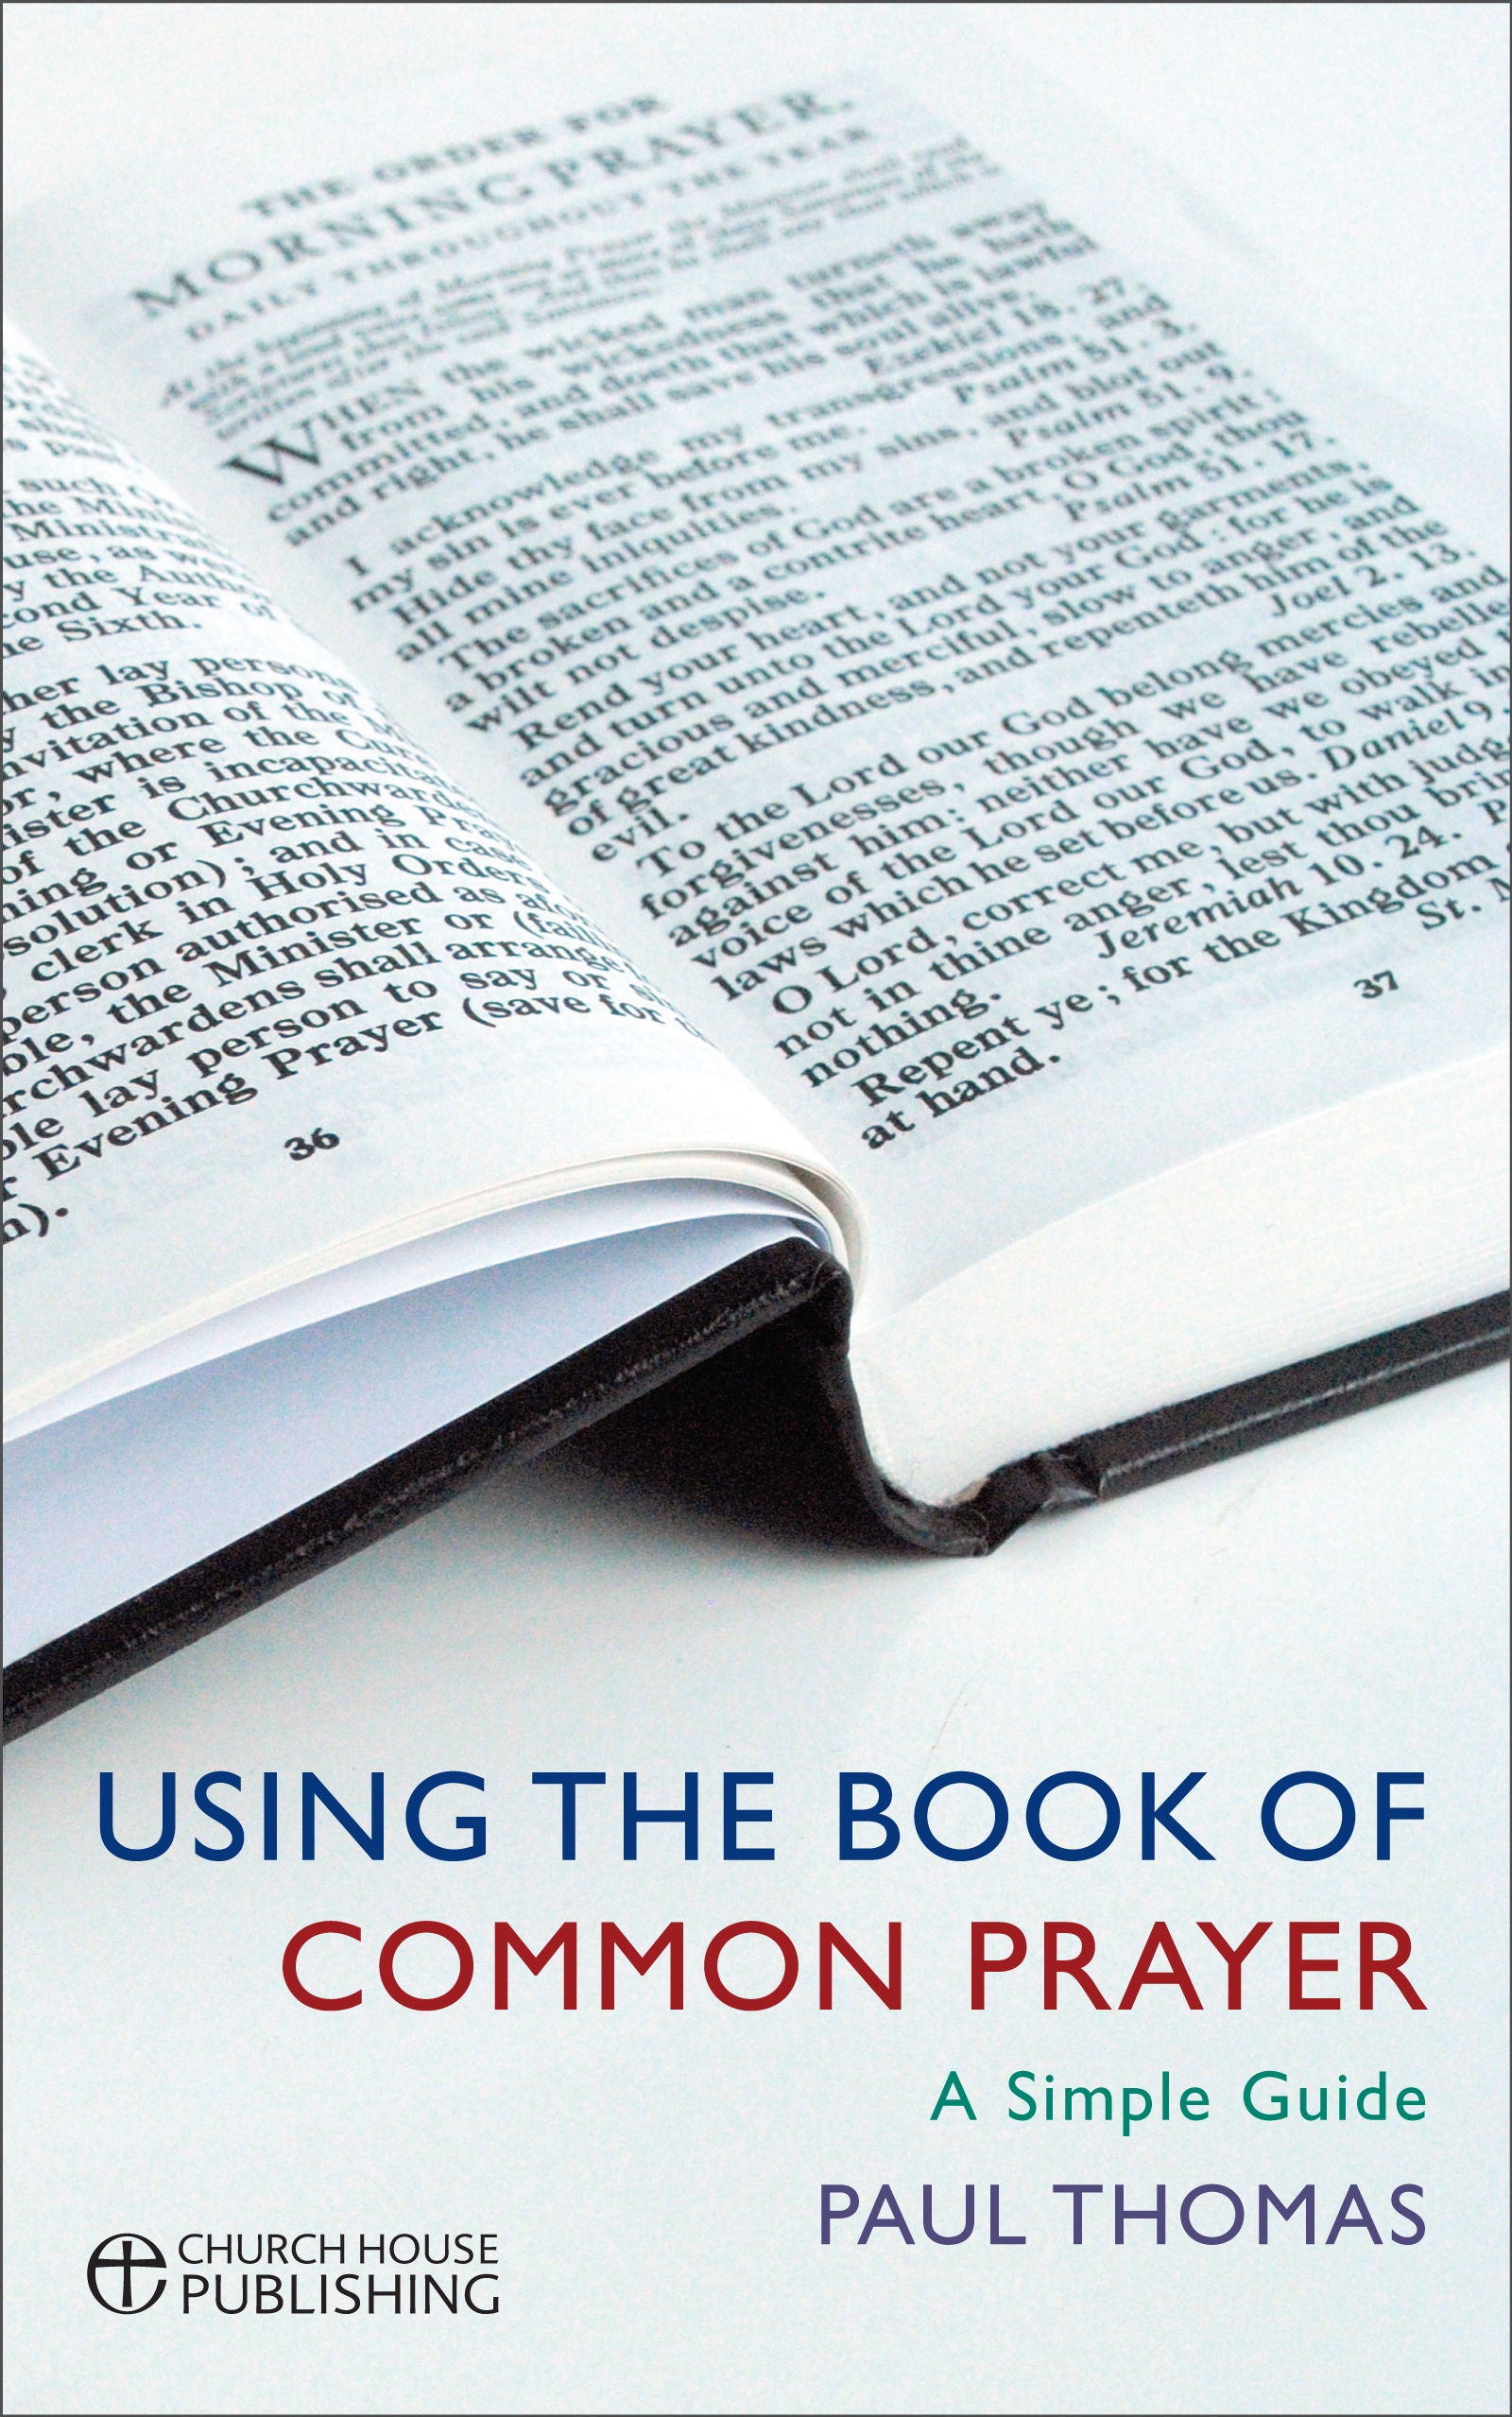 A User's Guide to the Book of Common Prayer: A Simple Guide